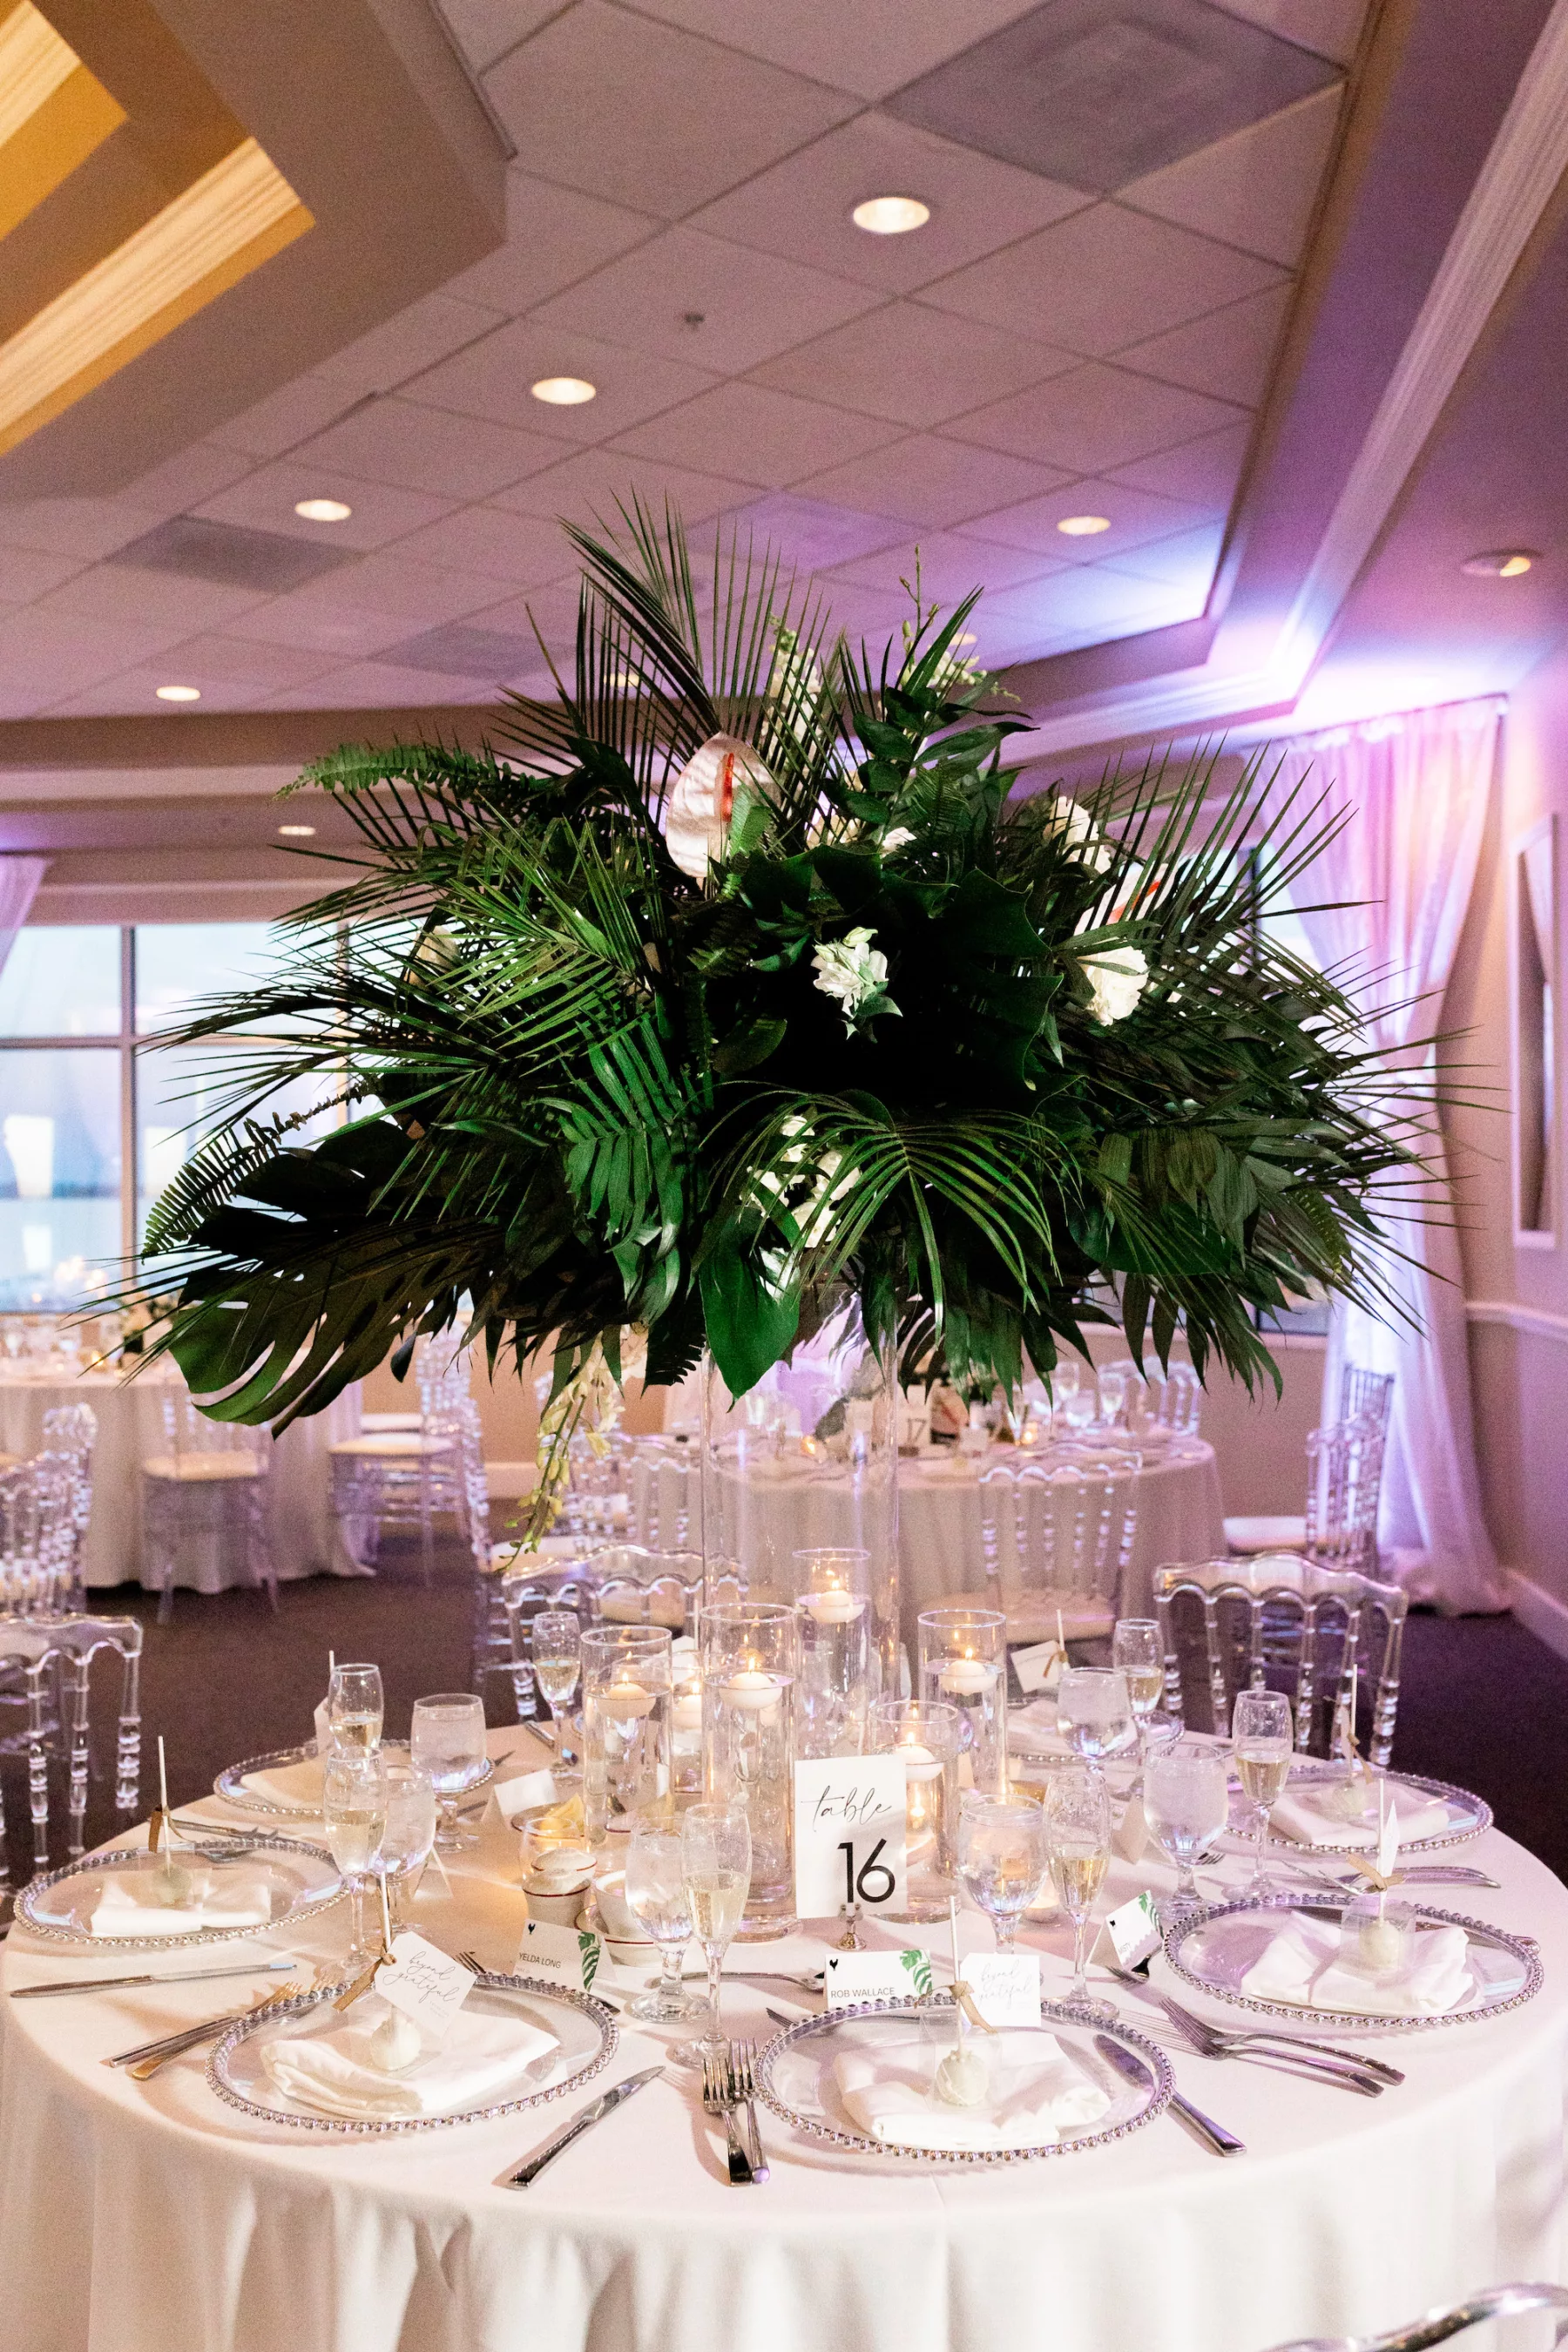 Modern White Wedding Reception with Tall Tropical Floral Centerpiece Arrangement | Monstera Leaves, Palm Fronds, White Anthurium and Roses